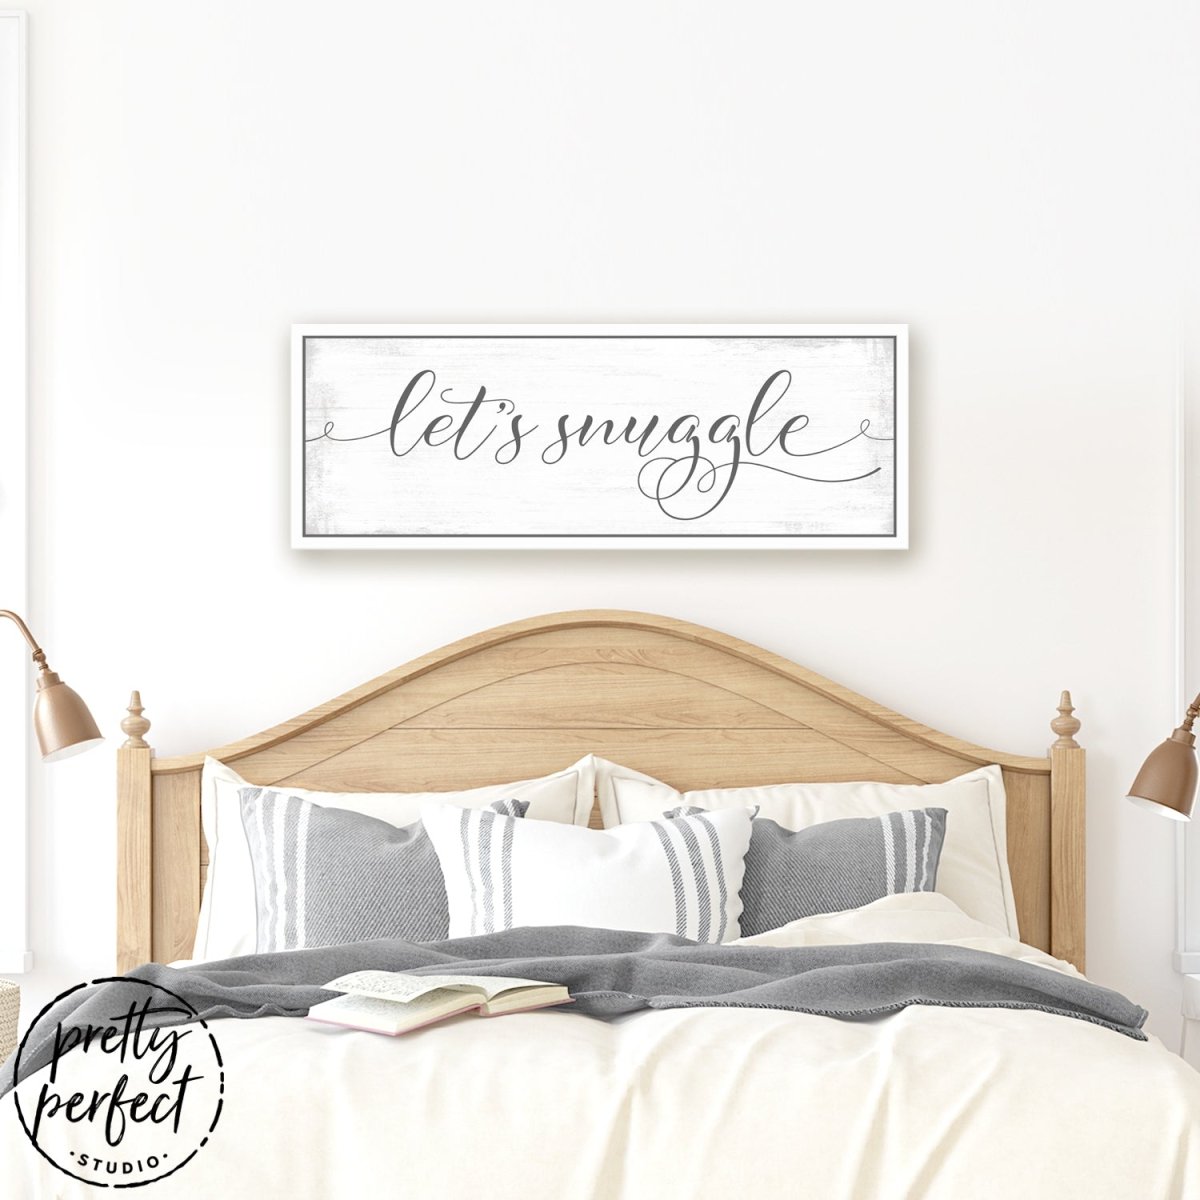 Let's Snuggle Bedroom Sign Above Bed - Pretty Perfect Studio